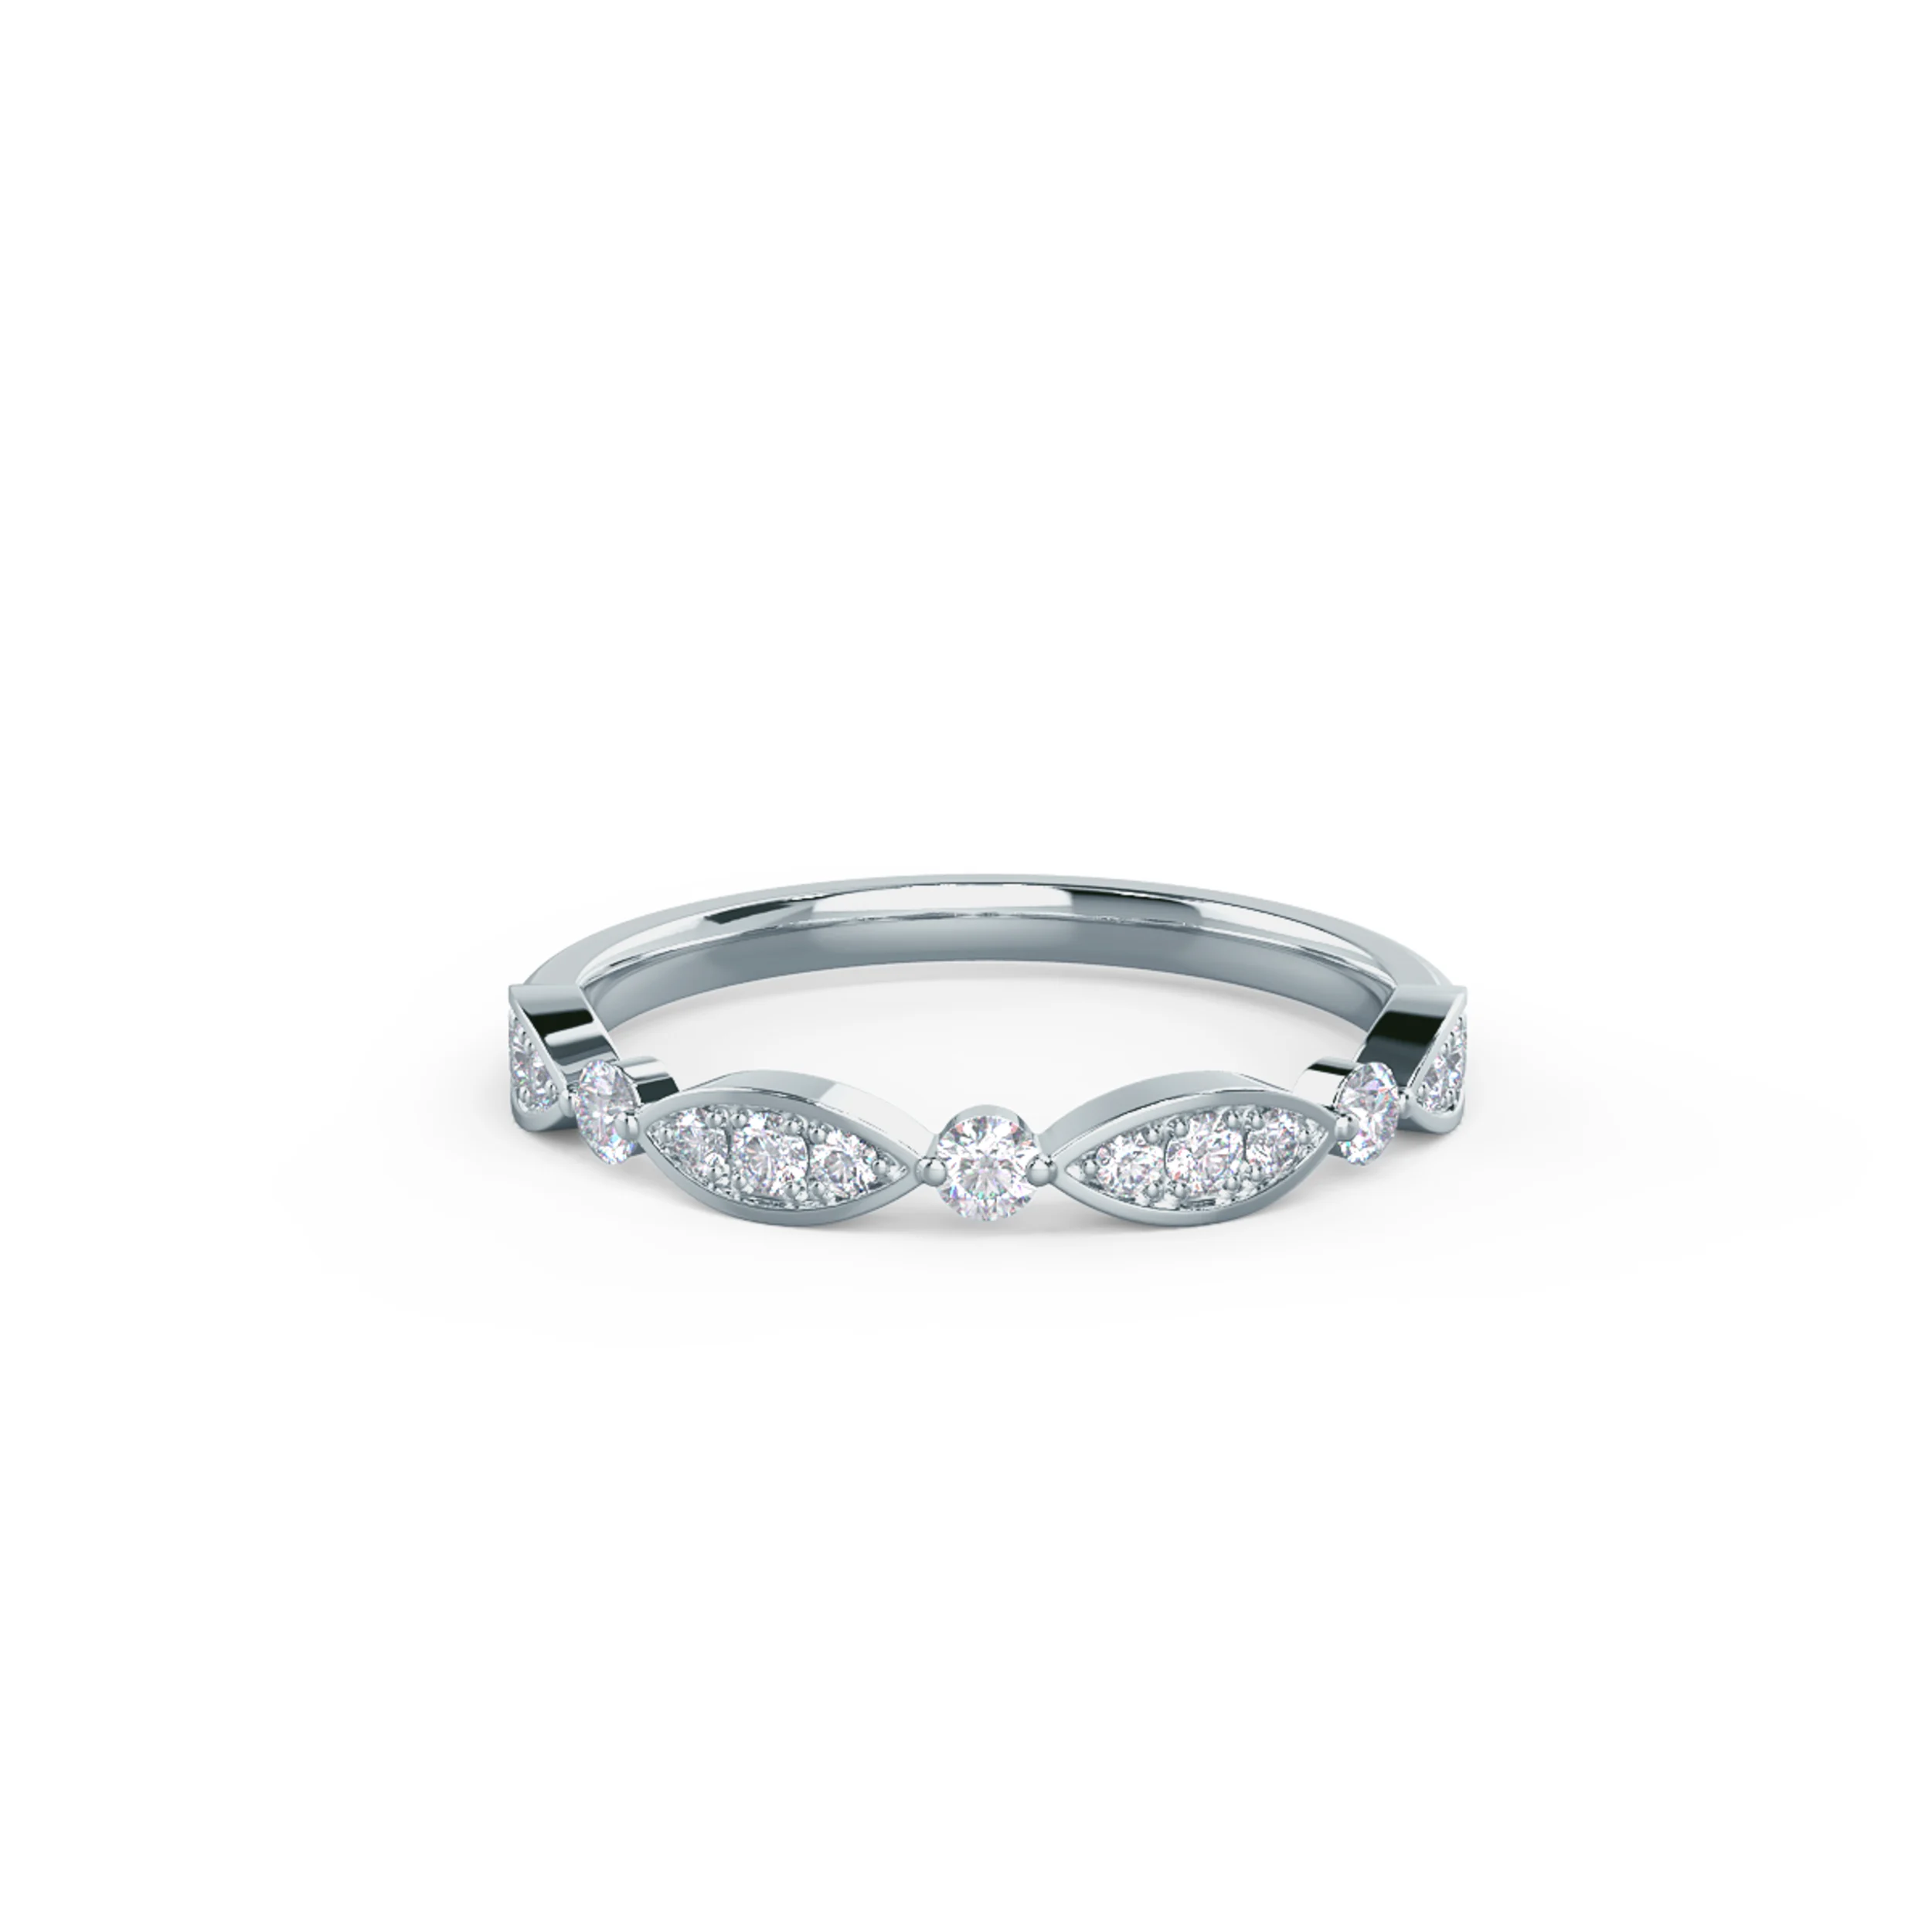 Exceptional Quality 0.25 ct Round Lab Diamonds set in 18kt White Gold Leaf Half Band (Main View)